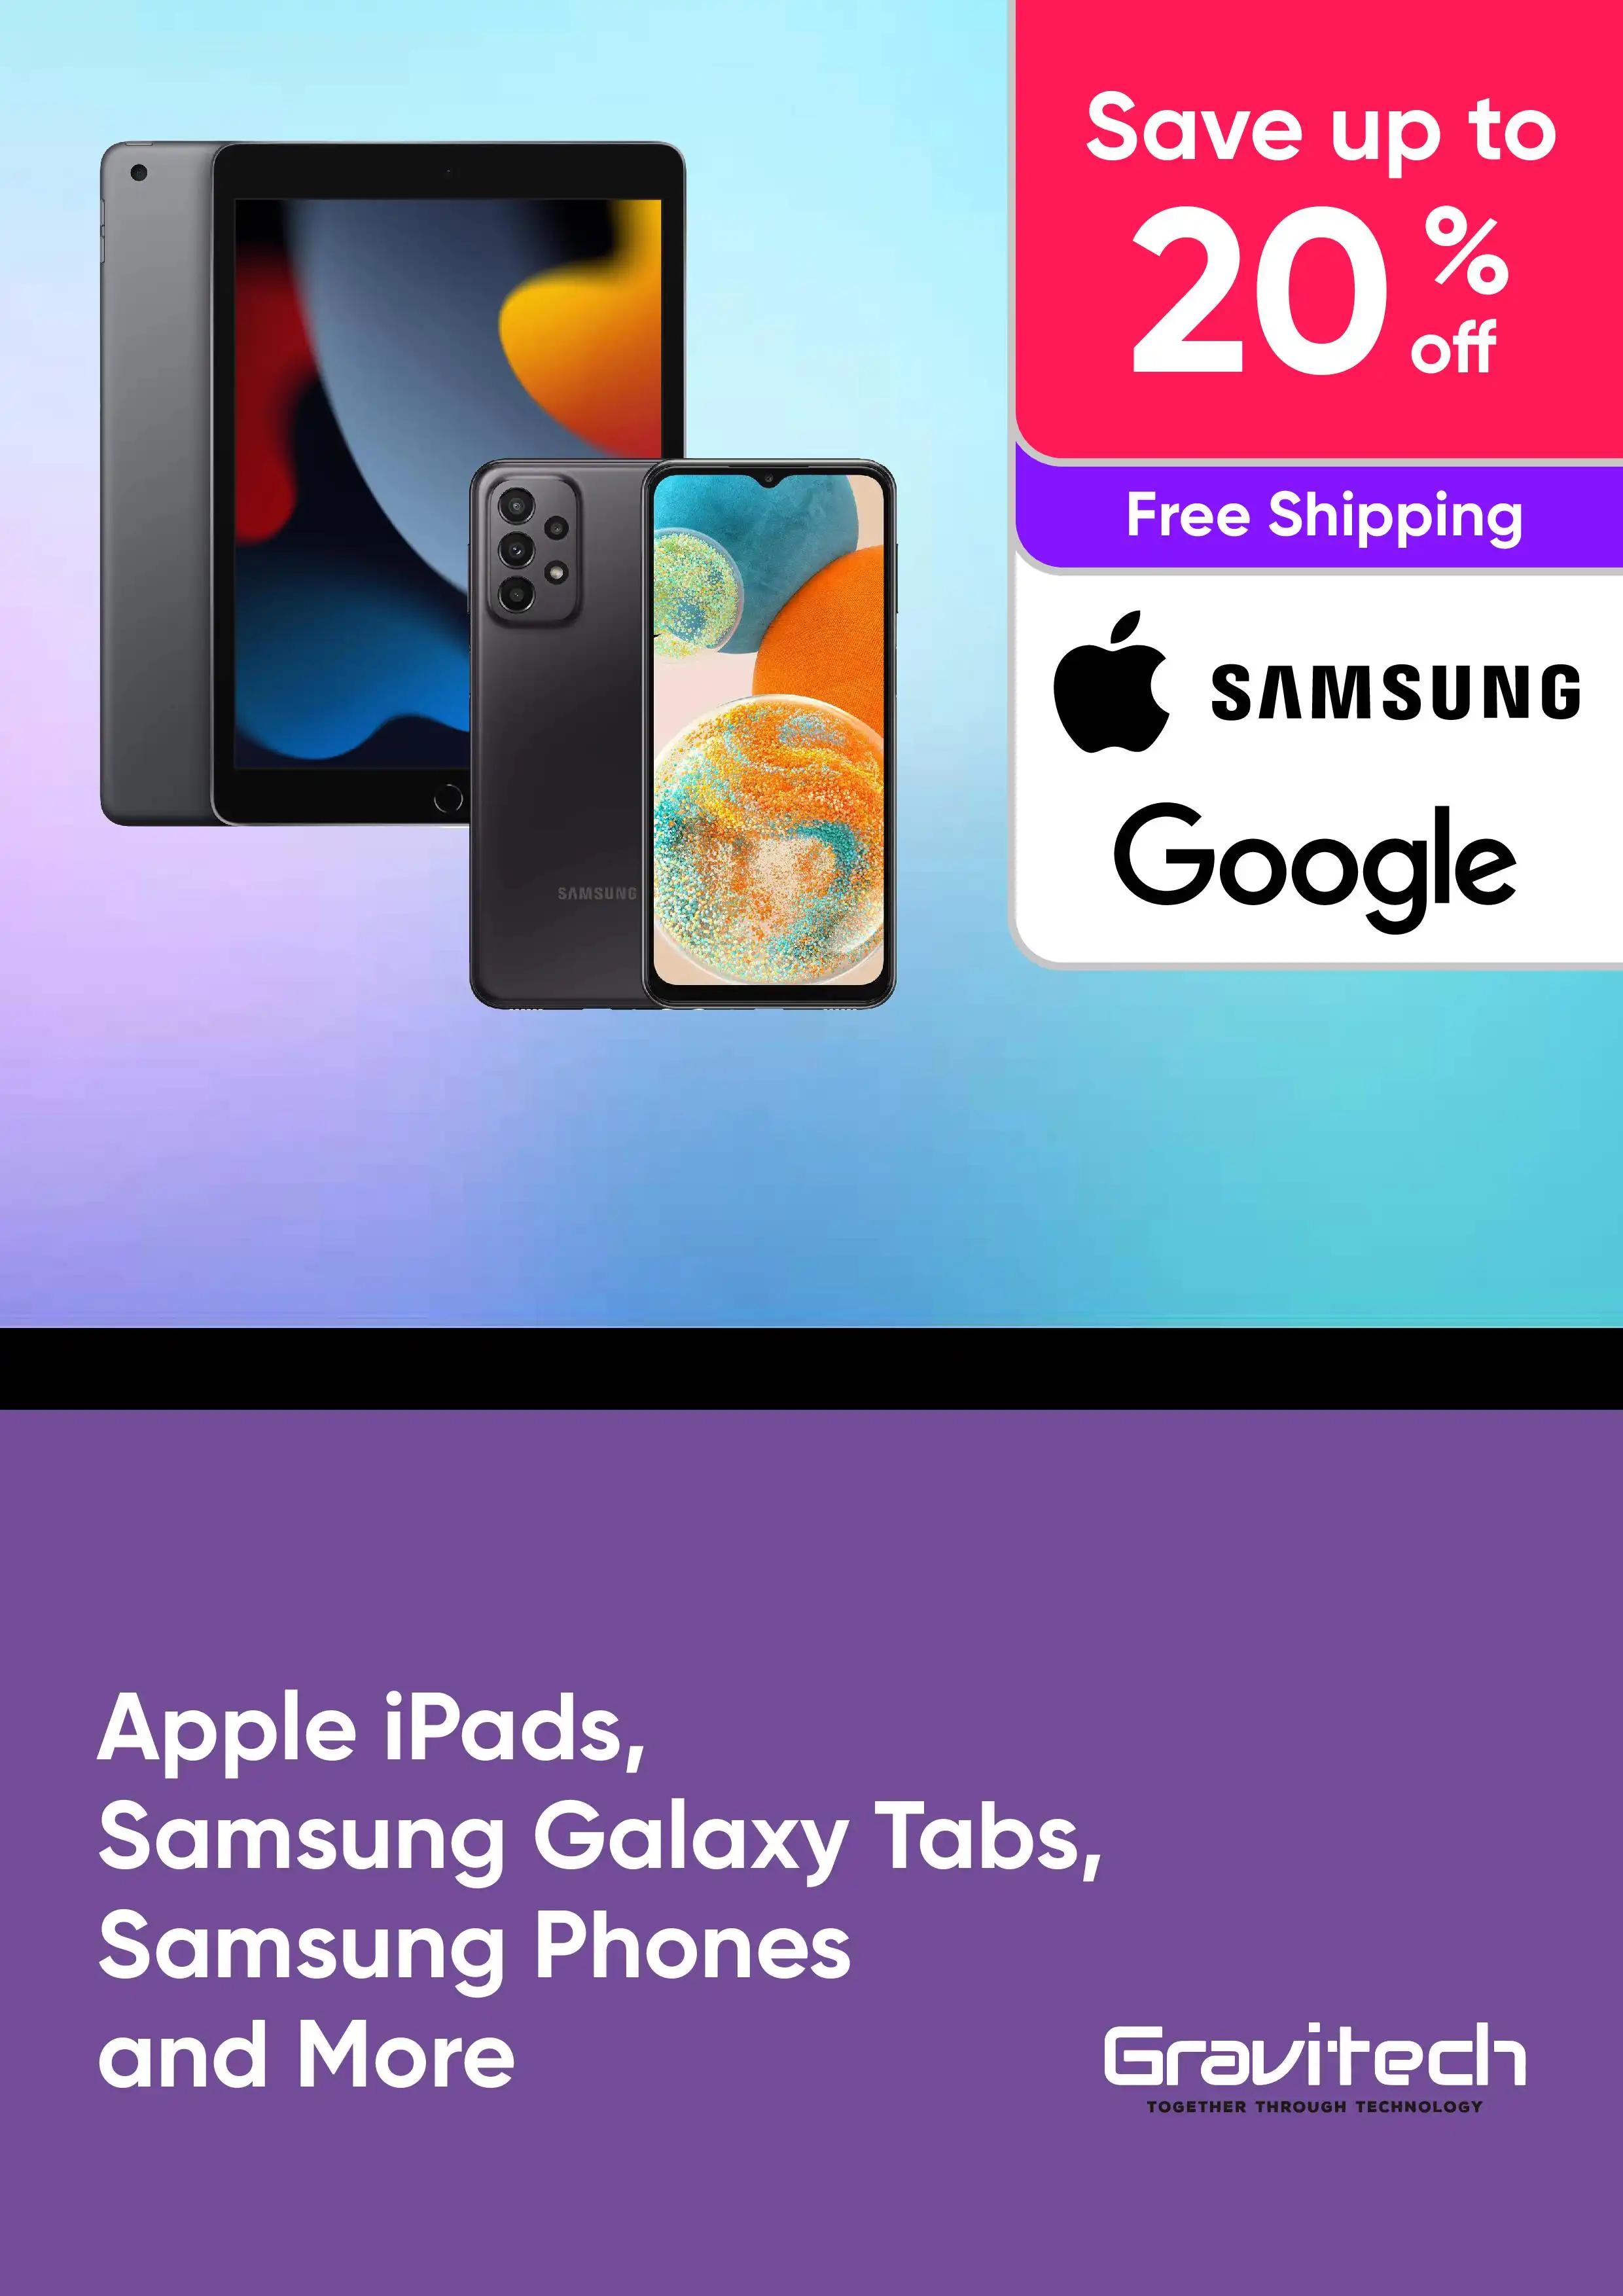 Save Up To 20% Off Apple iPads, Samsung Galaxy Tabs, Samsung Phones and More